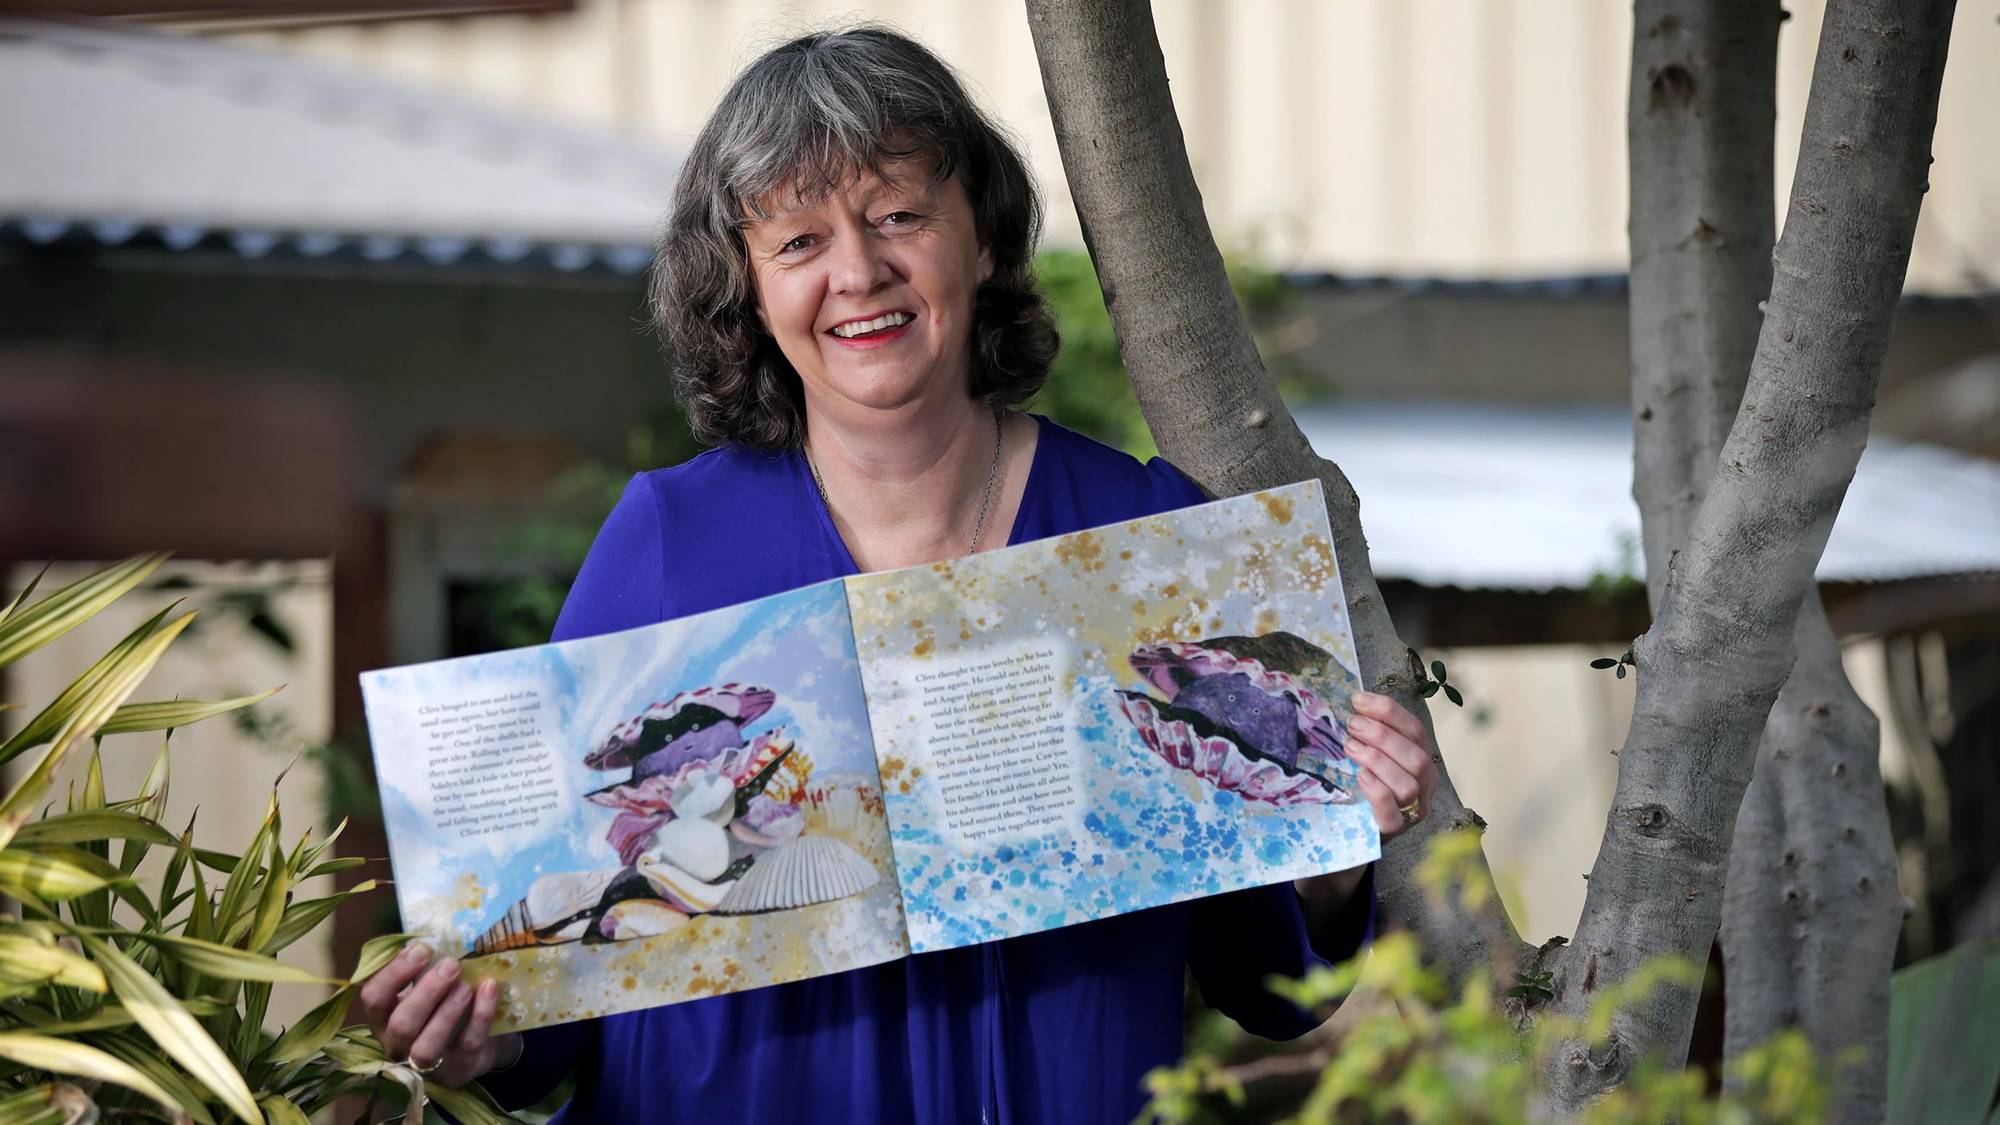 Perth author Diana Smith launches children's book The Adventures of Clive